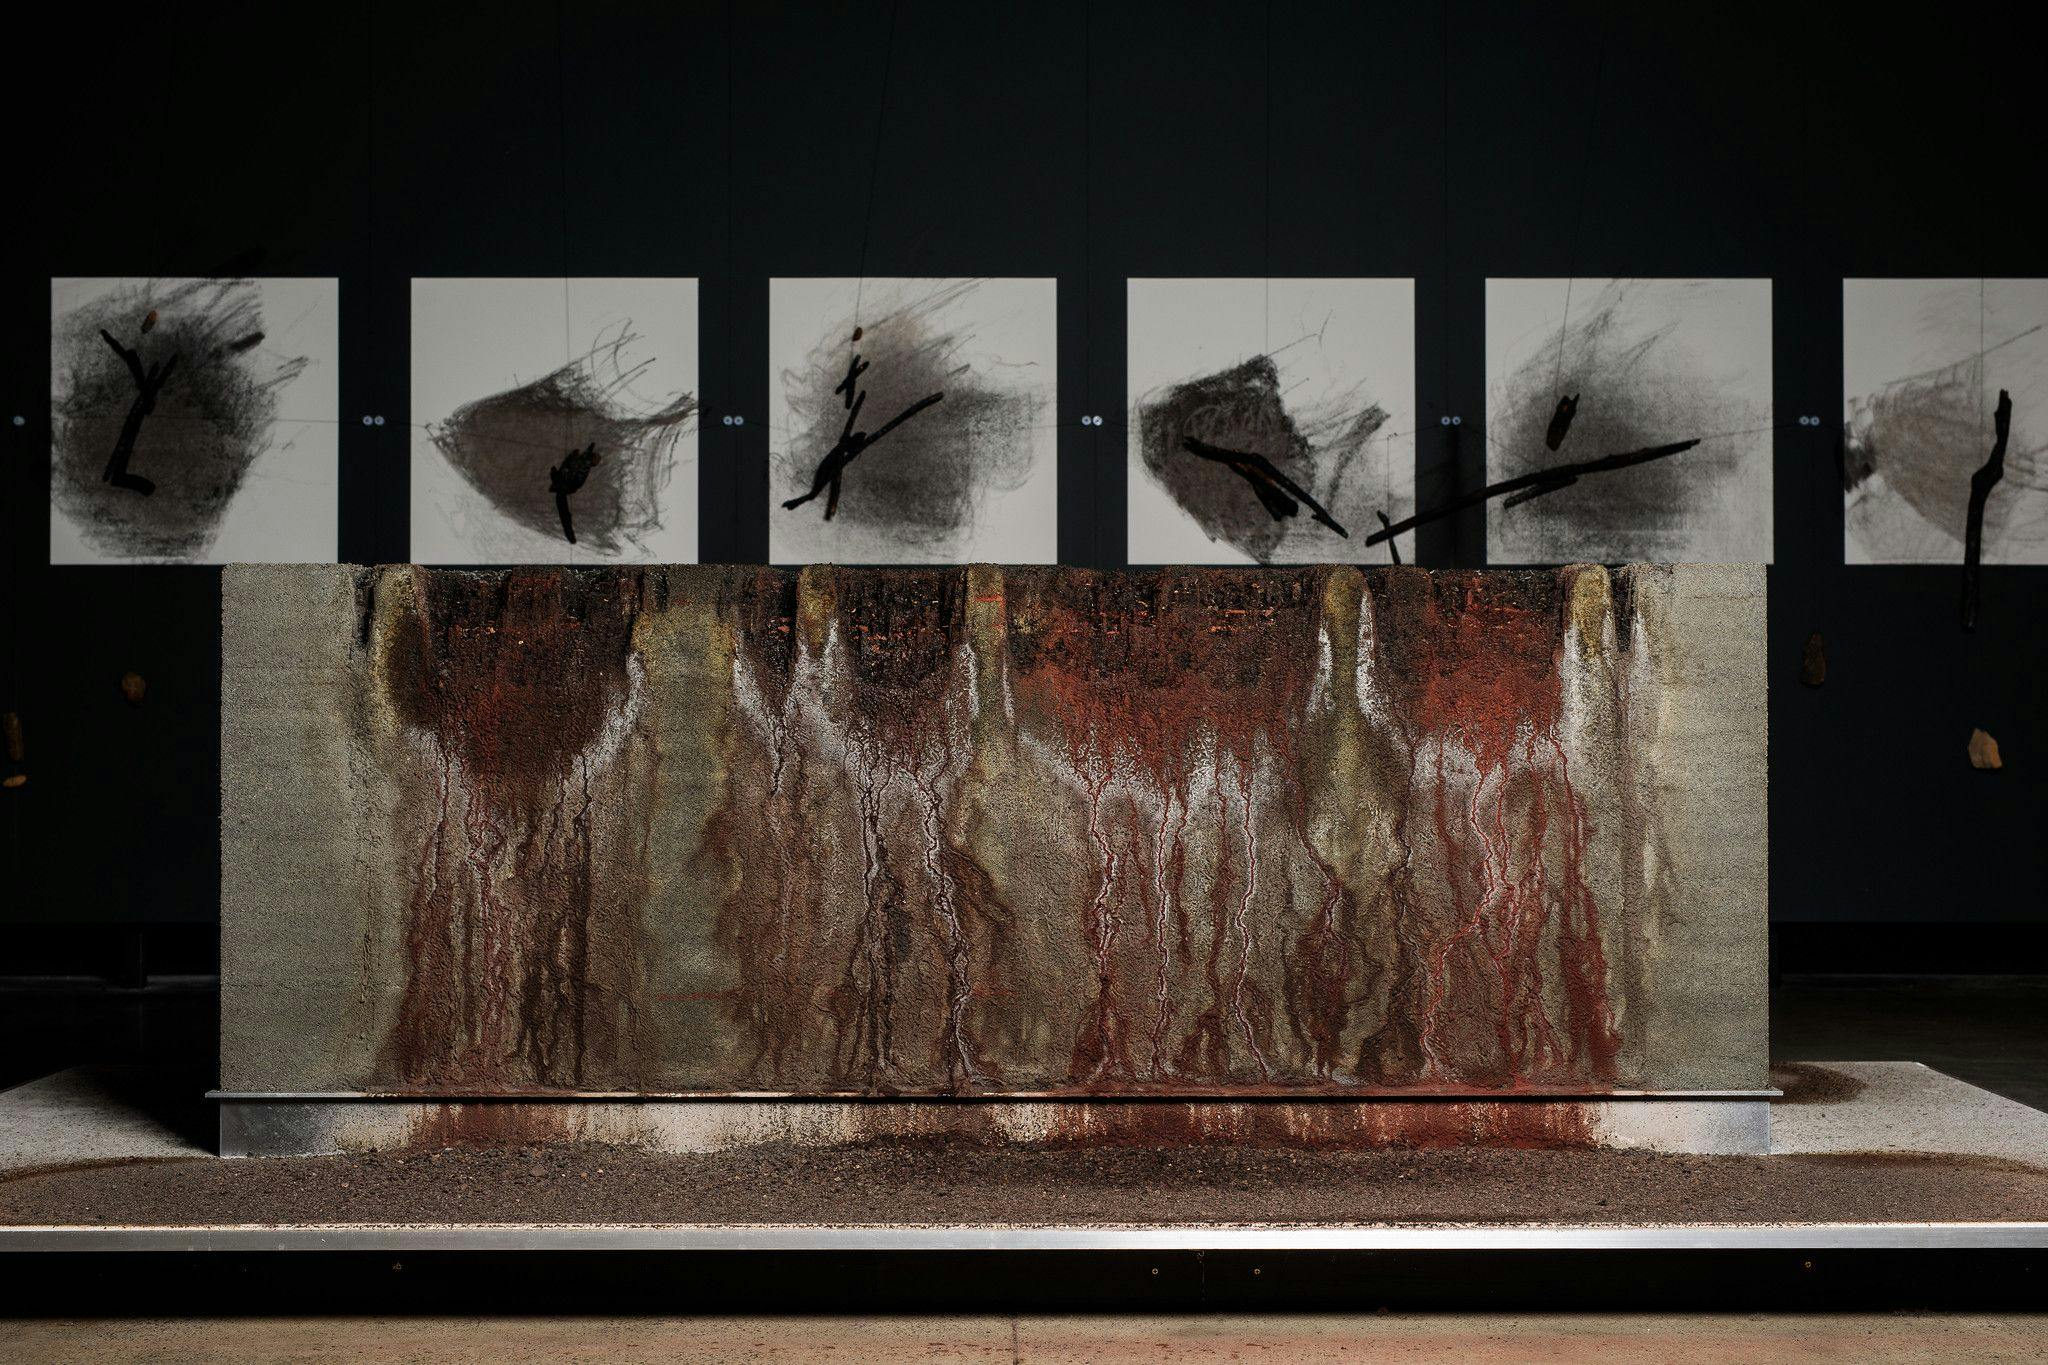 6 charcoal drawings made by a mechanical plotting system. Water erosion stains a plinth of compacted soil.